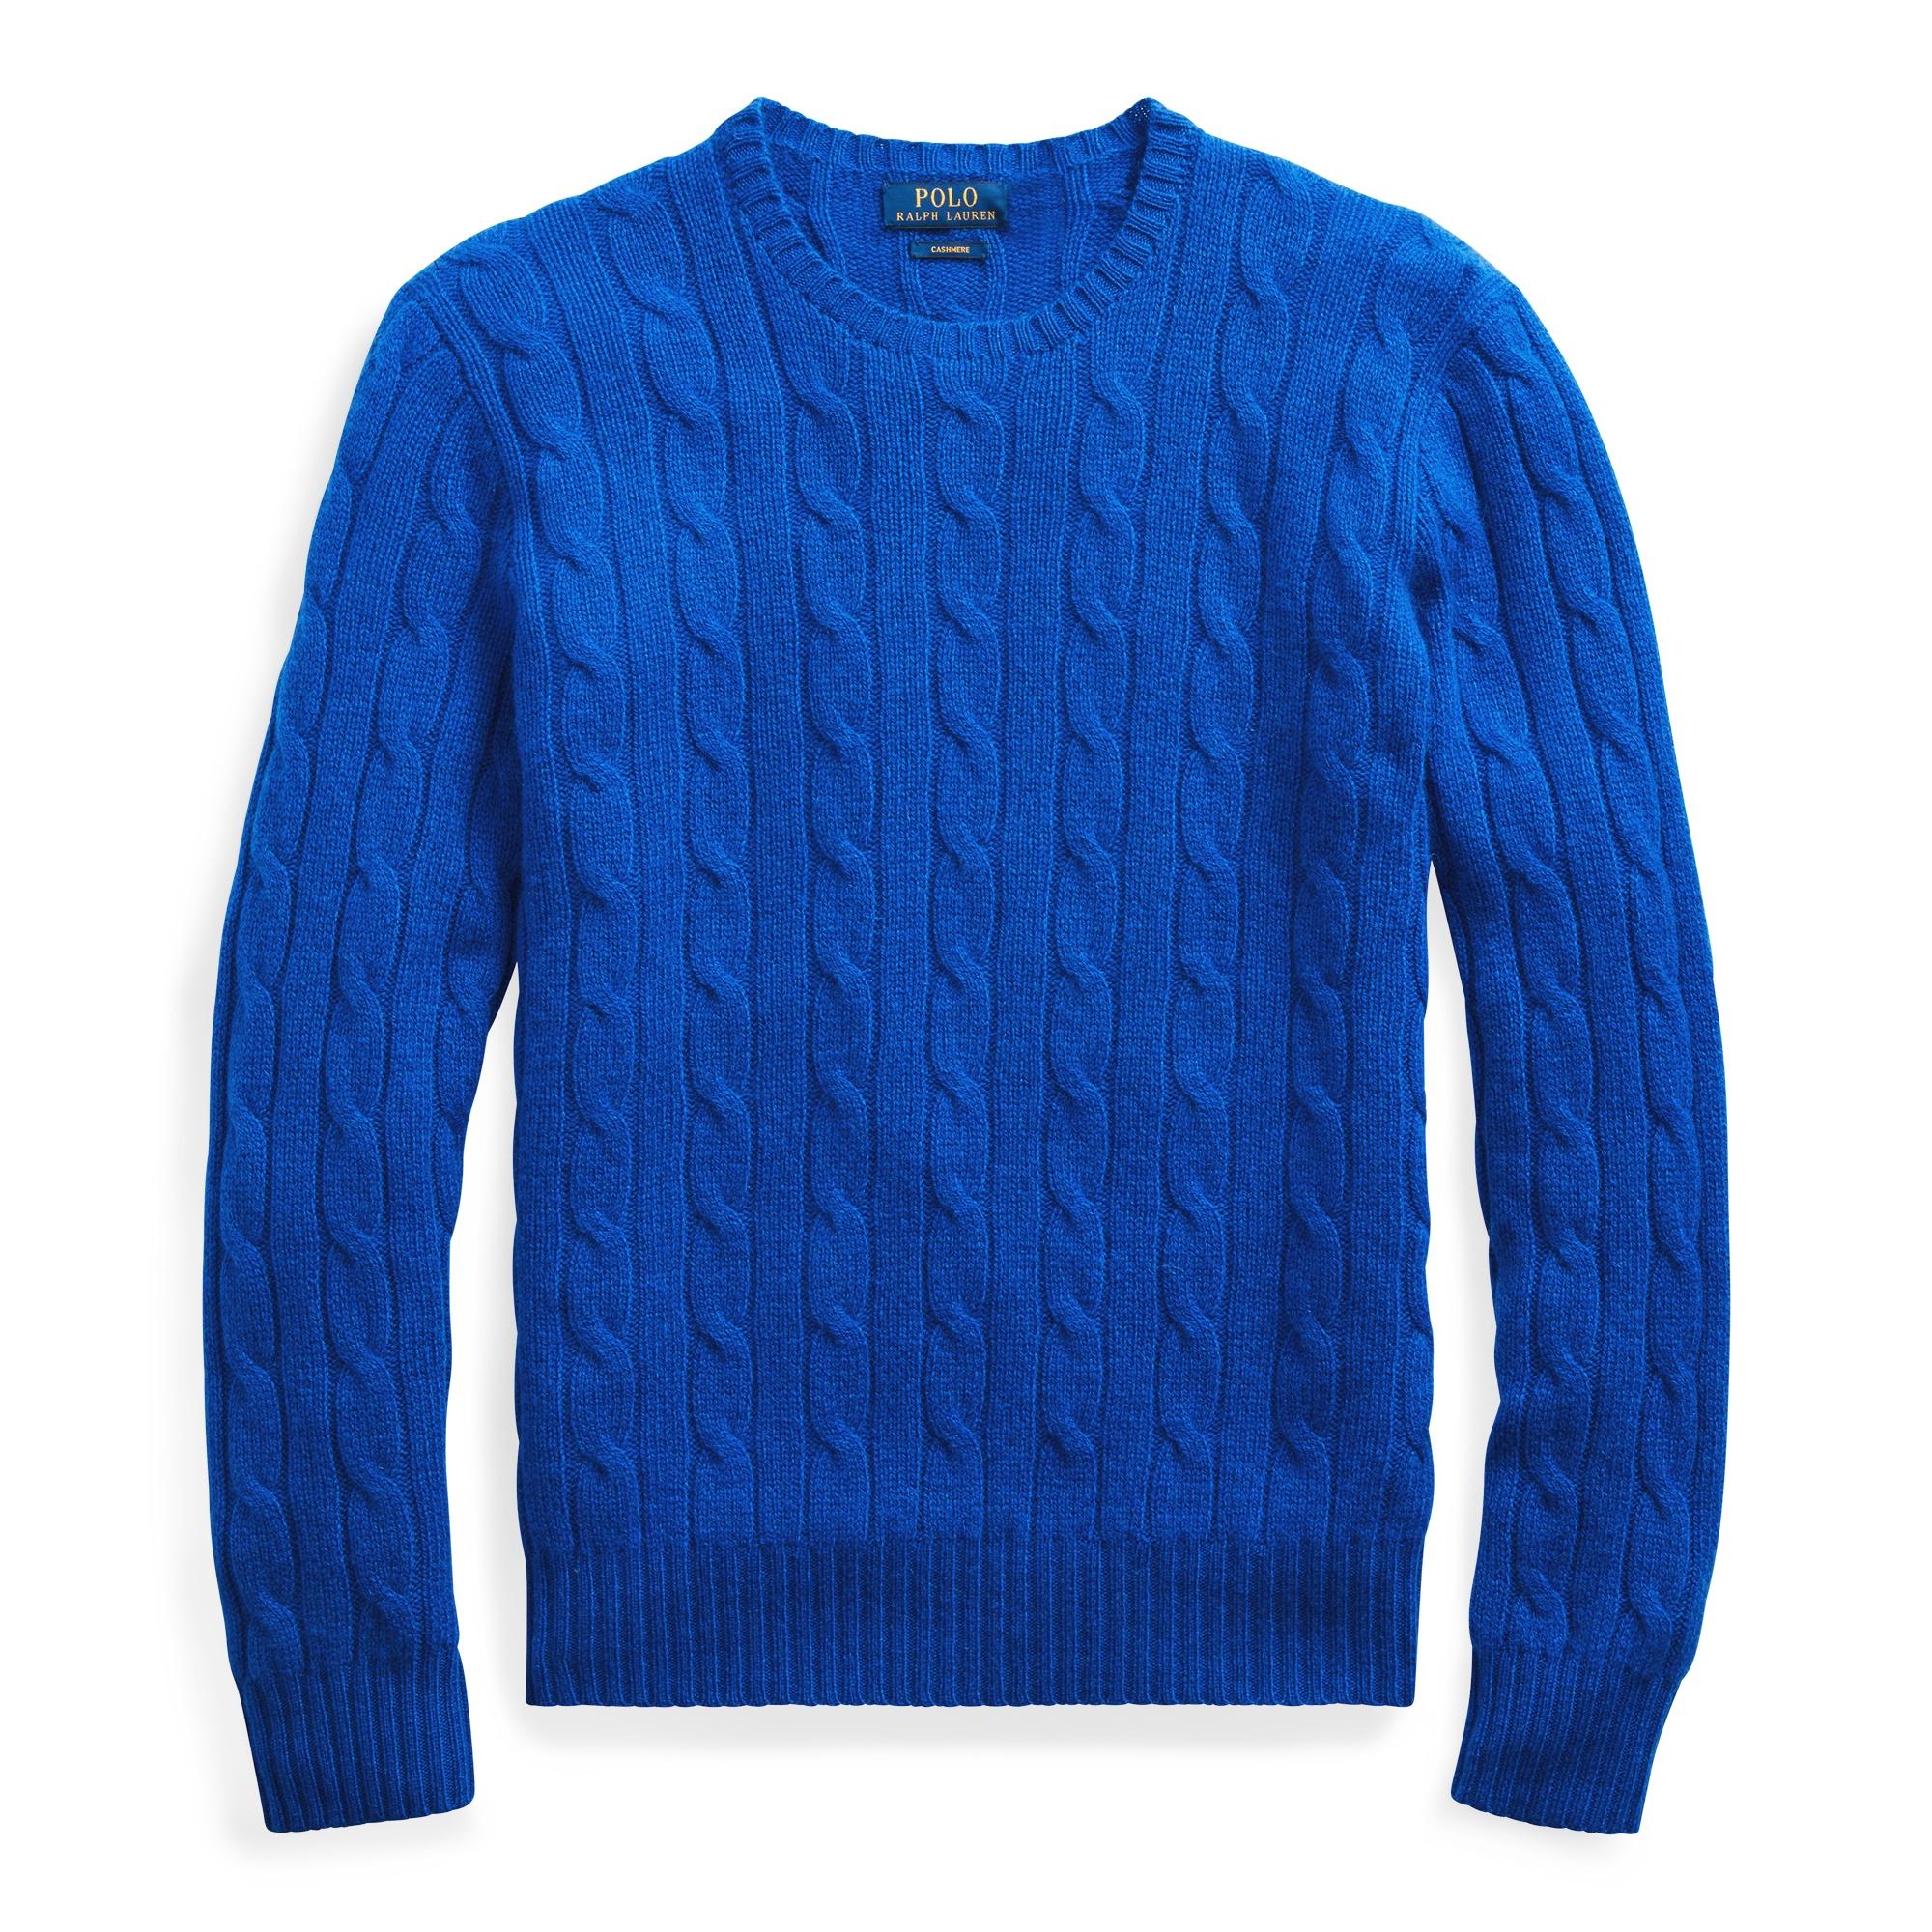 Ralph Lauren Cable-knit Cashmere Sweater in Blue for Men - Lyst